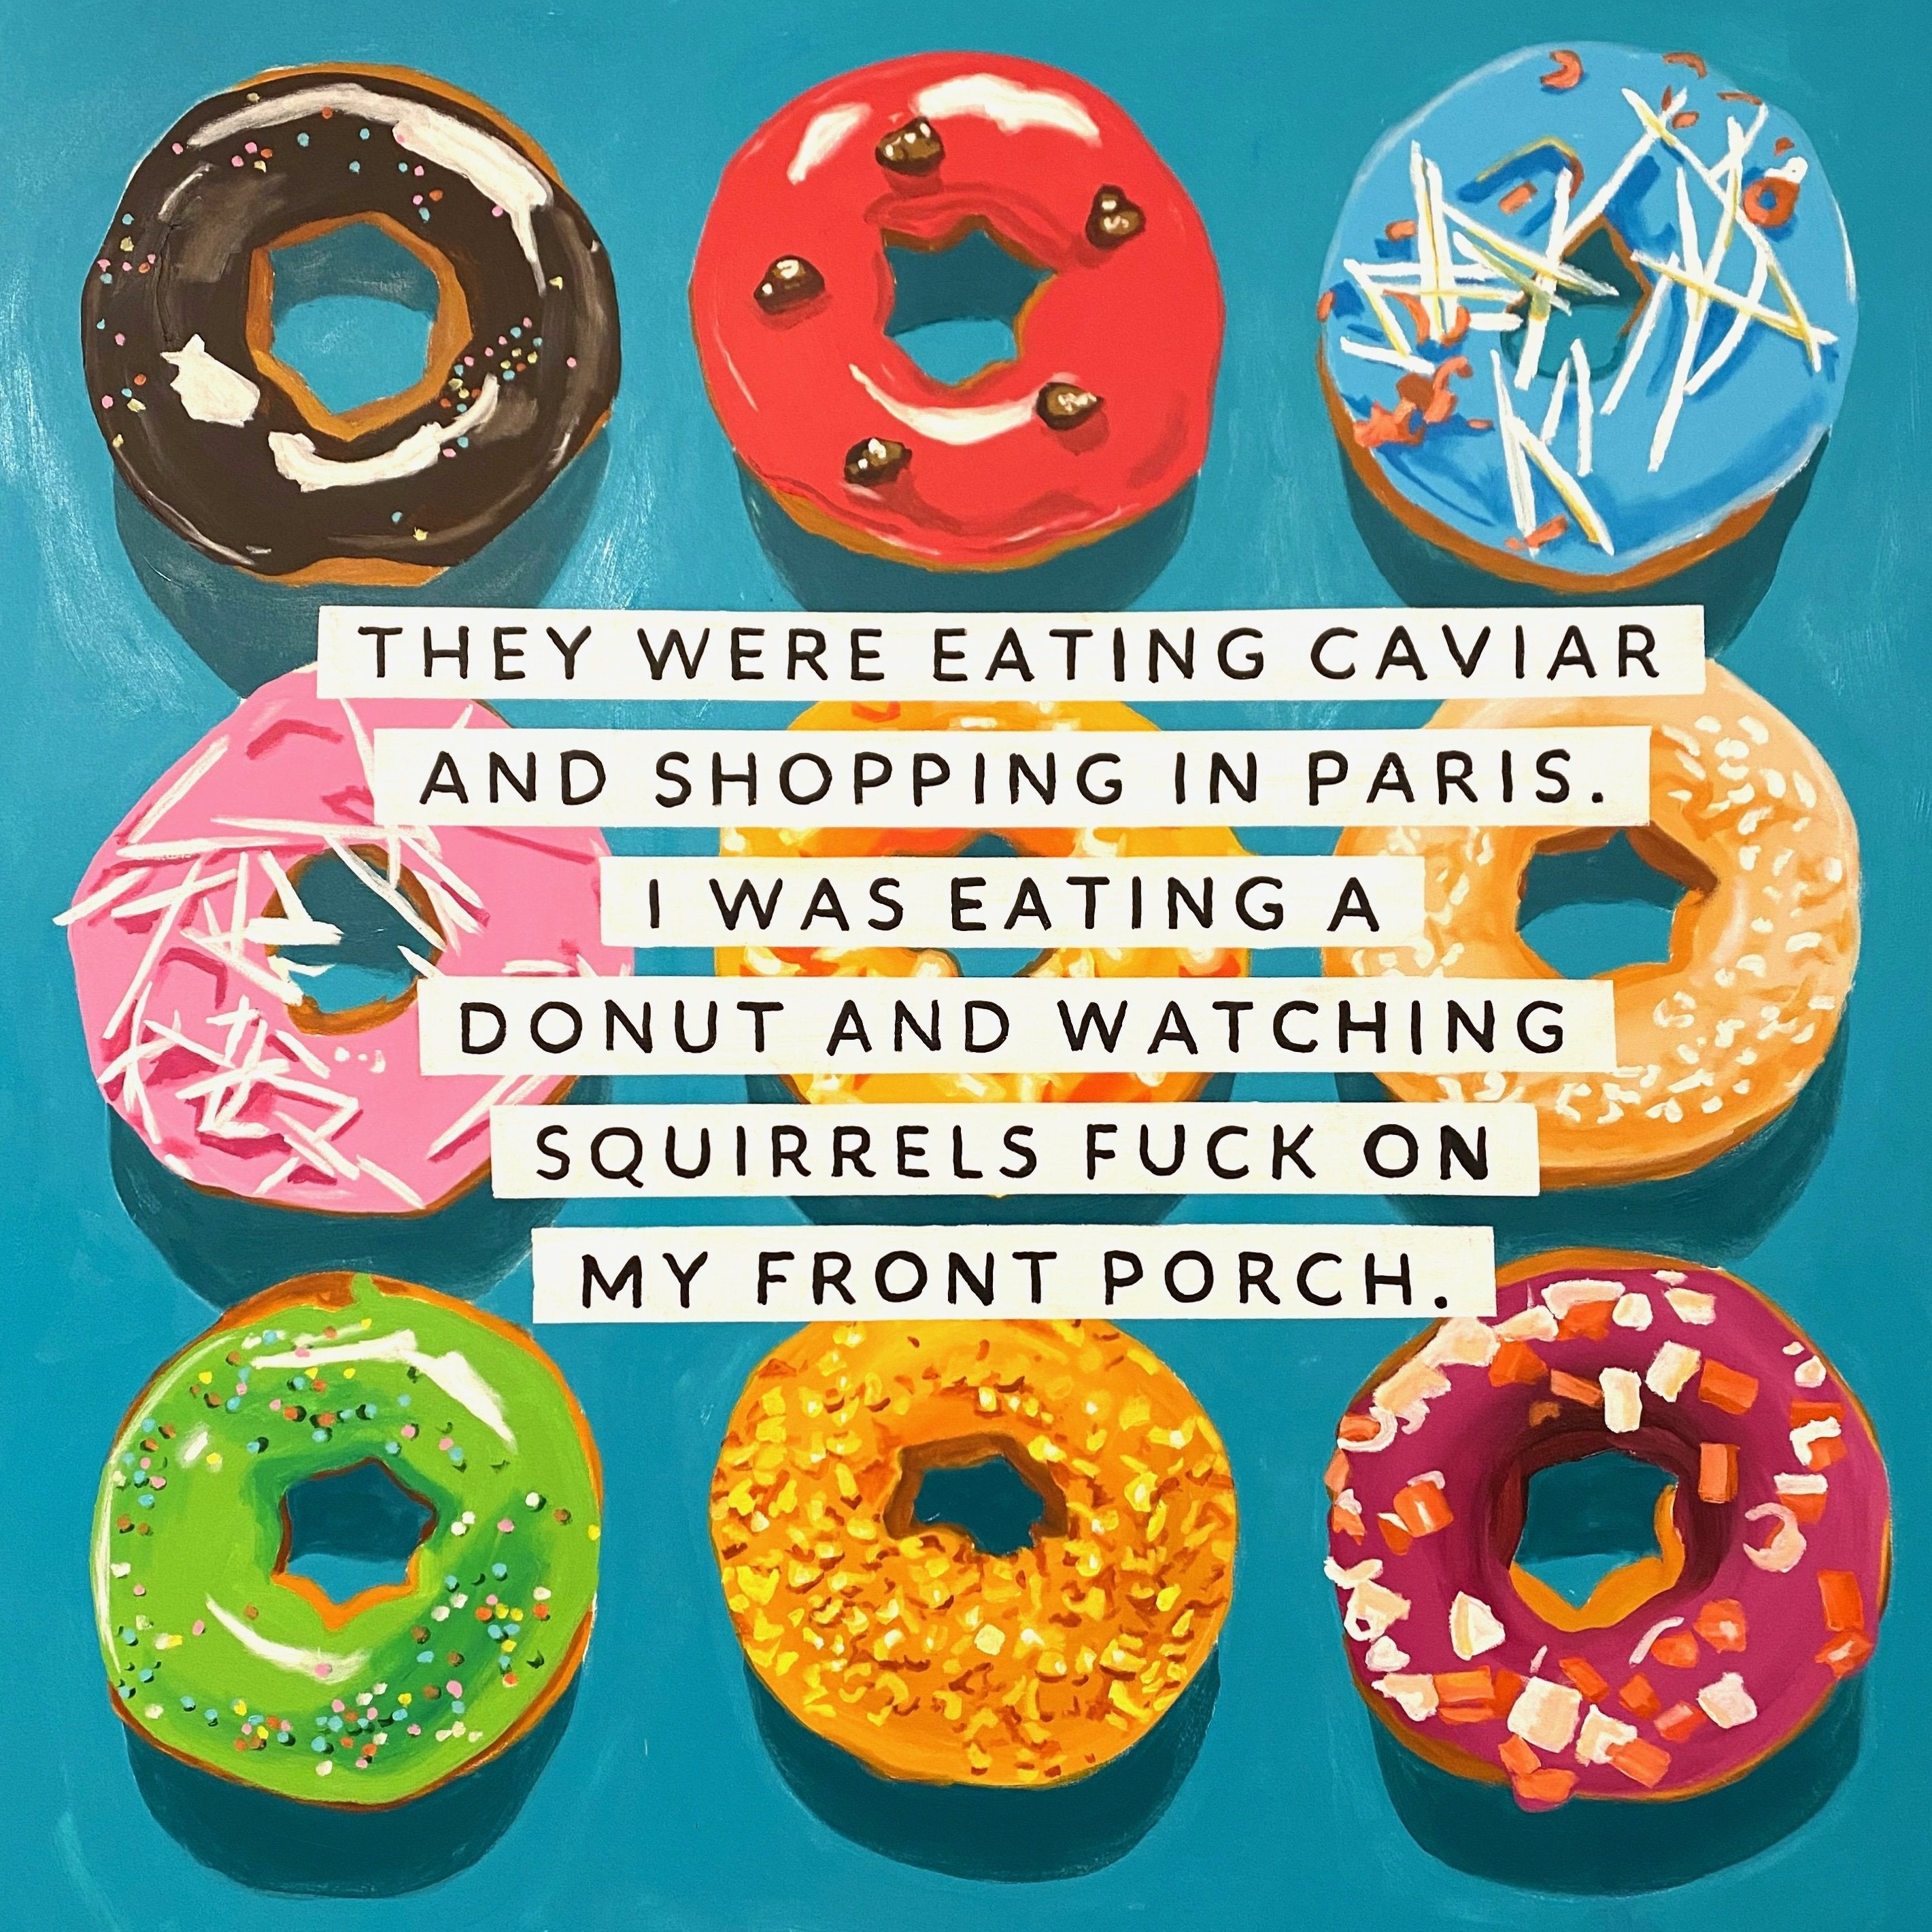 They Were Eating Caviar and Shopping in Paris. I Was Eating a Donut and Watching Squirrels Fuck on My Front Porch.